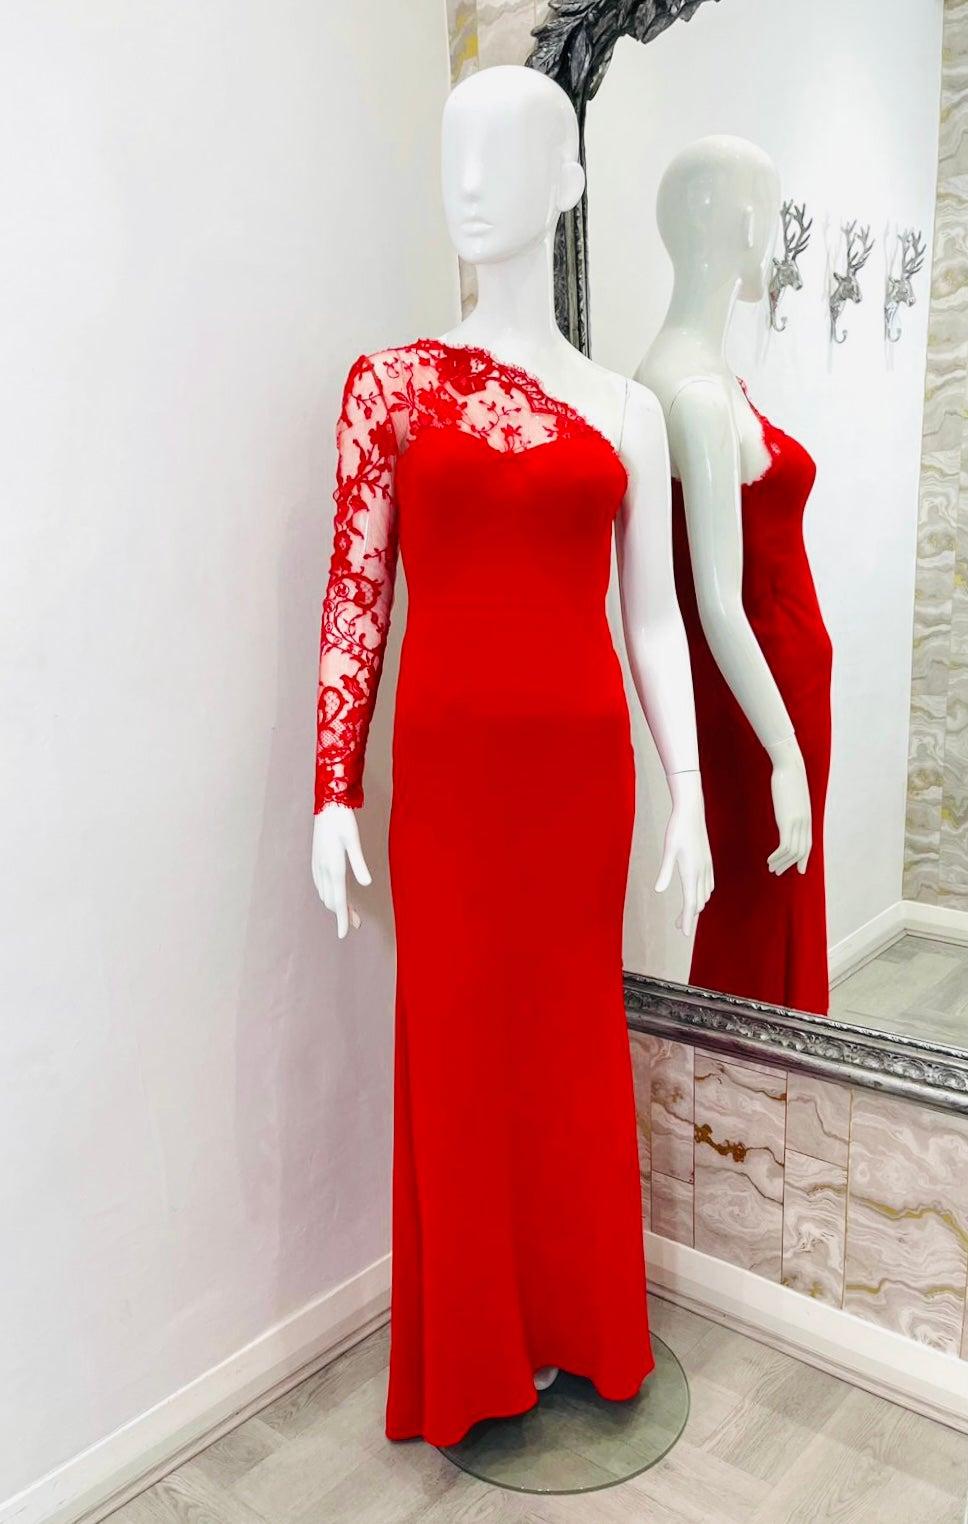 Alexander McQueen Lace One Shoulder Gown

Red one-shoulder gown is detailed with floral sheer lace that wraps asymmetrically to a scalloped high neck. A tonal banded waist and slit at the hemline giving a beautiful silhouette.

Additional